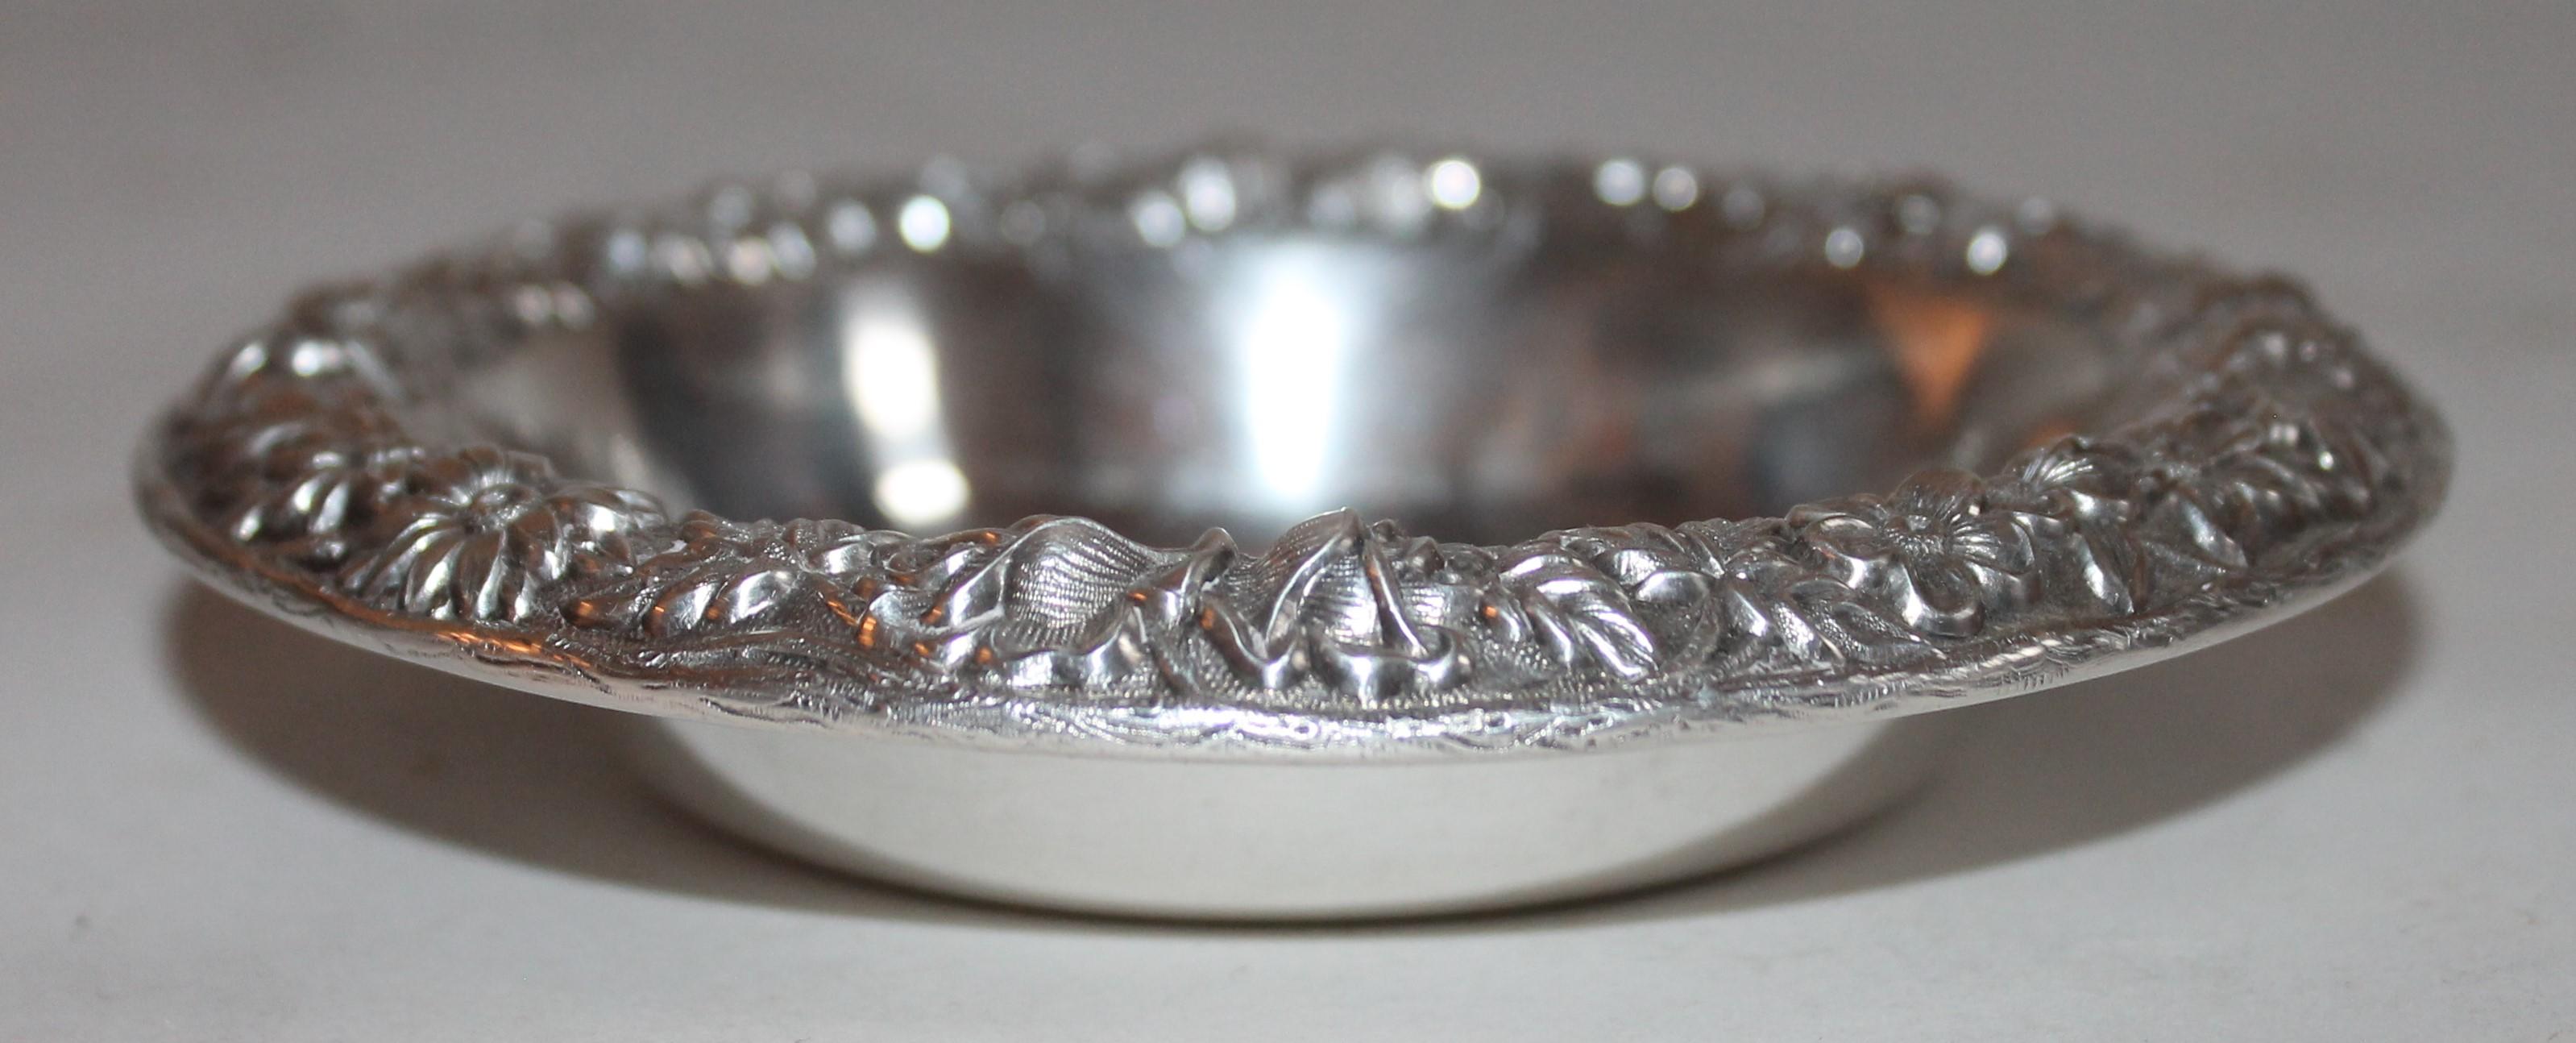 This sterling silver bon bon bowl is signed sterling & S. Kirk & Sons Inc. This is a heavy bowl and looks like a finger bowl or candy dish. Very well made and full of detail work. This small bowl is a rare find.